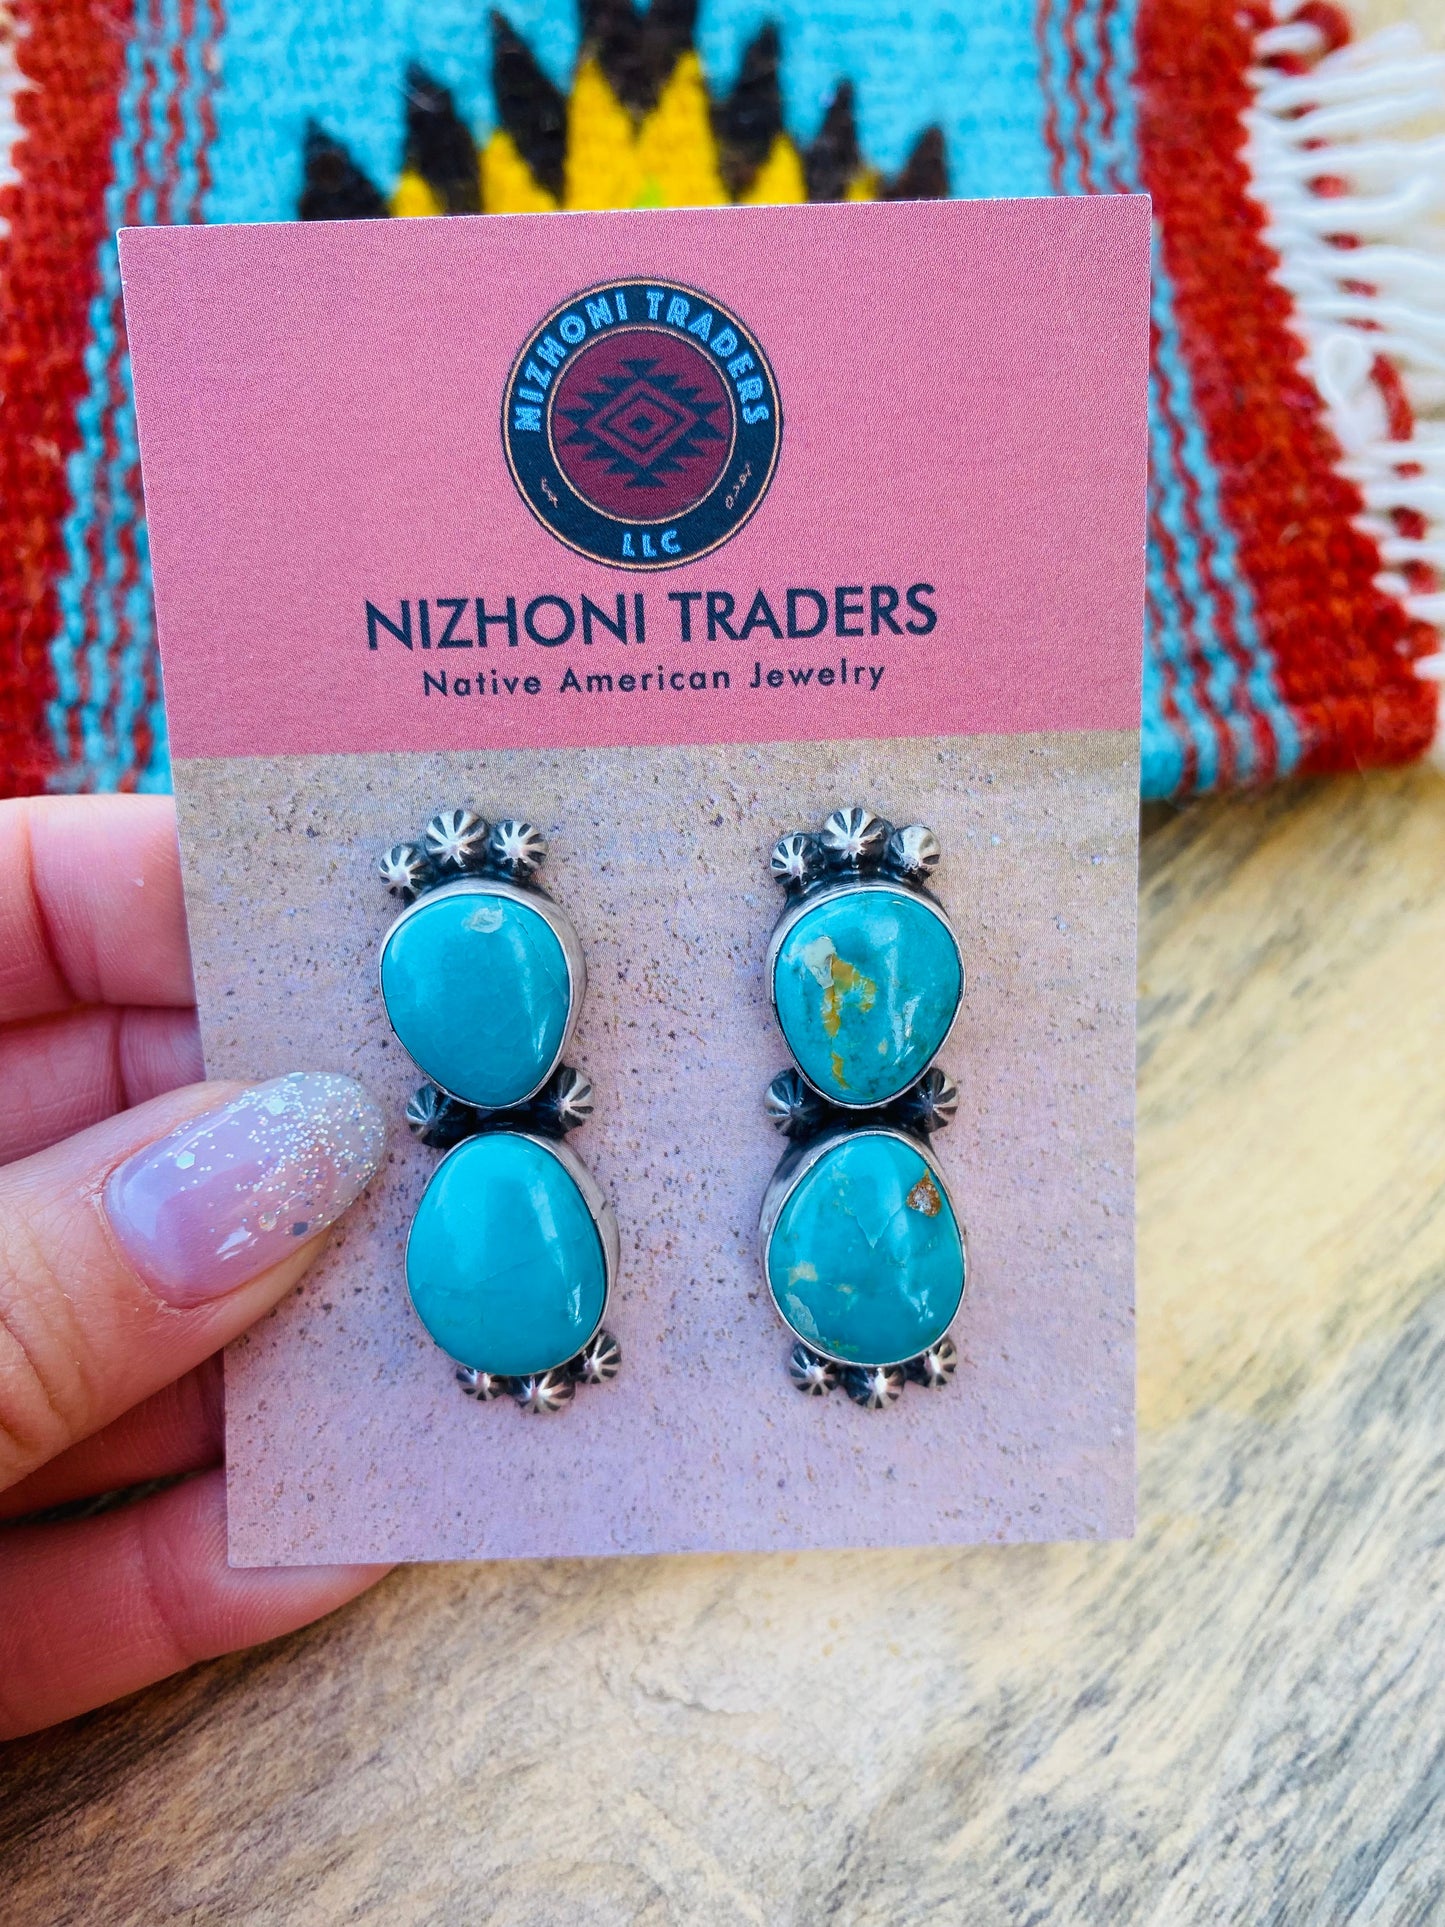 Navajo Sterling Silver & Royston Turquoise Post Earrings Signed